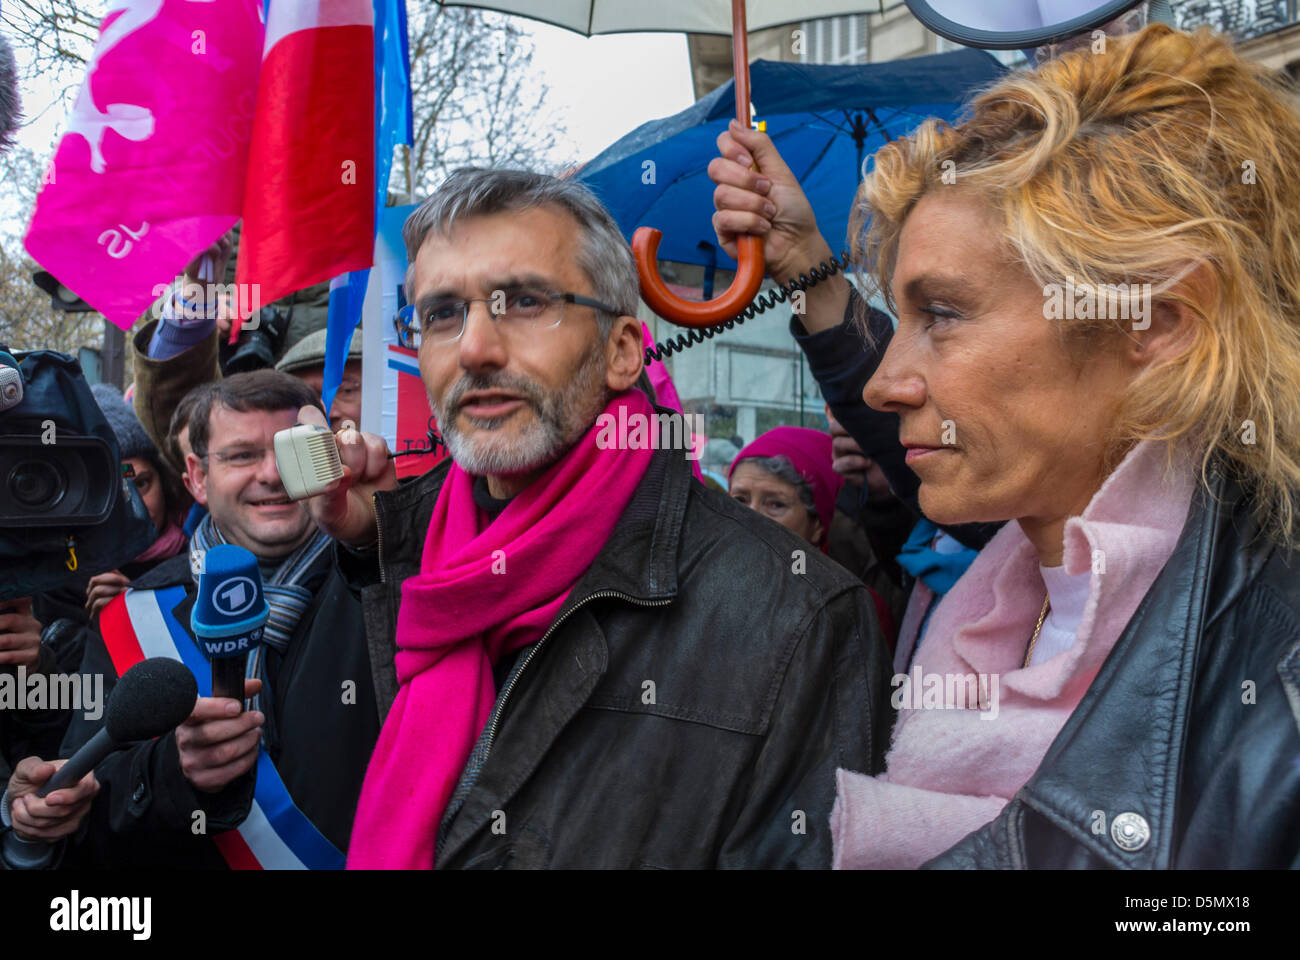 Paris, France, Anti Gay Marriage Activists in the conservatives Demonstration, 'Manif pour Tous', far right, extreme prejudice, catholic activists, Traditionalists religion in politics Stock Photo